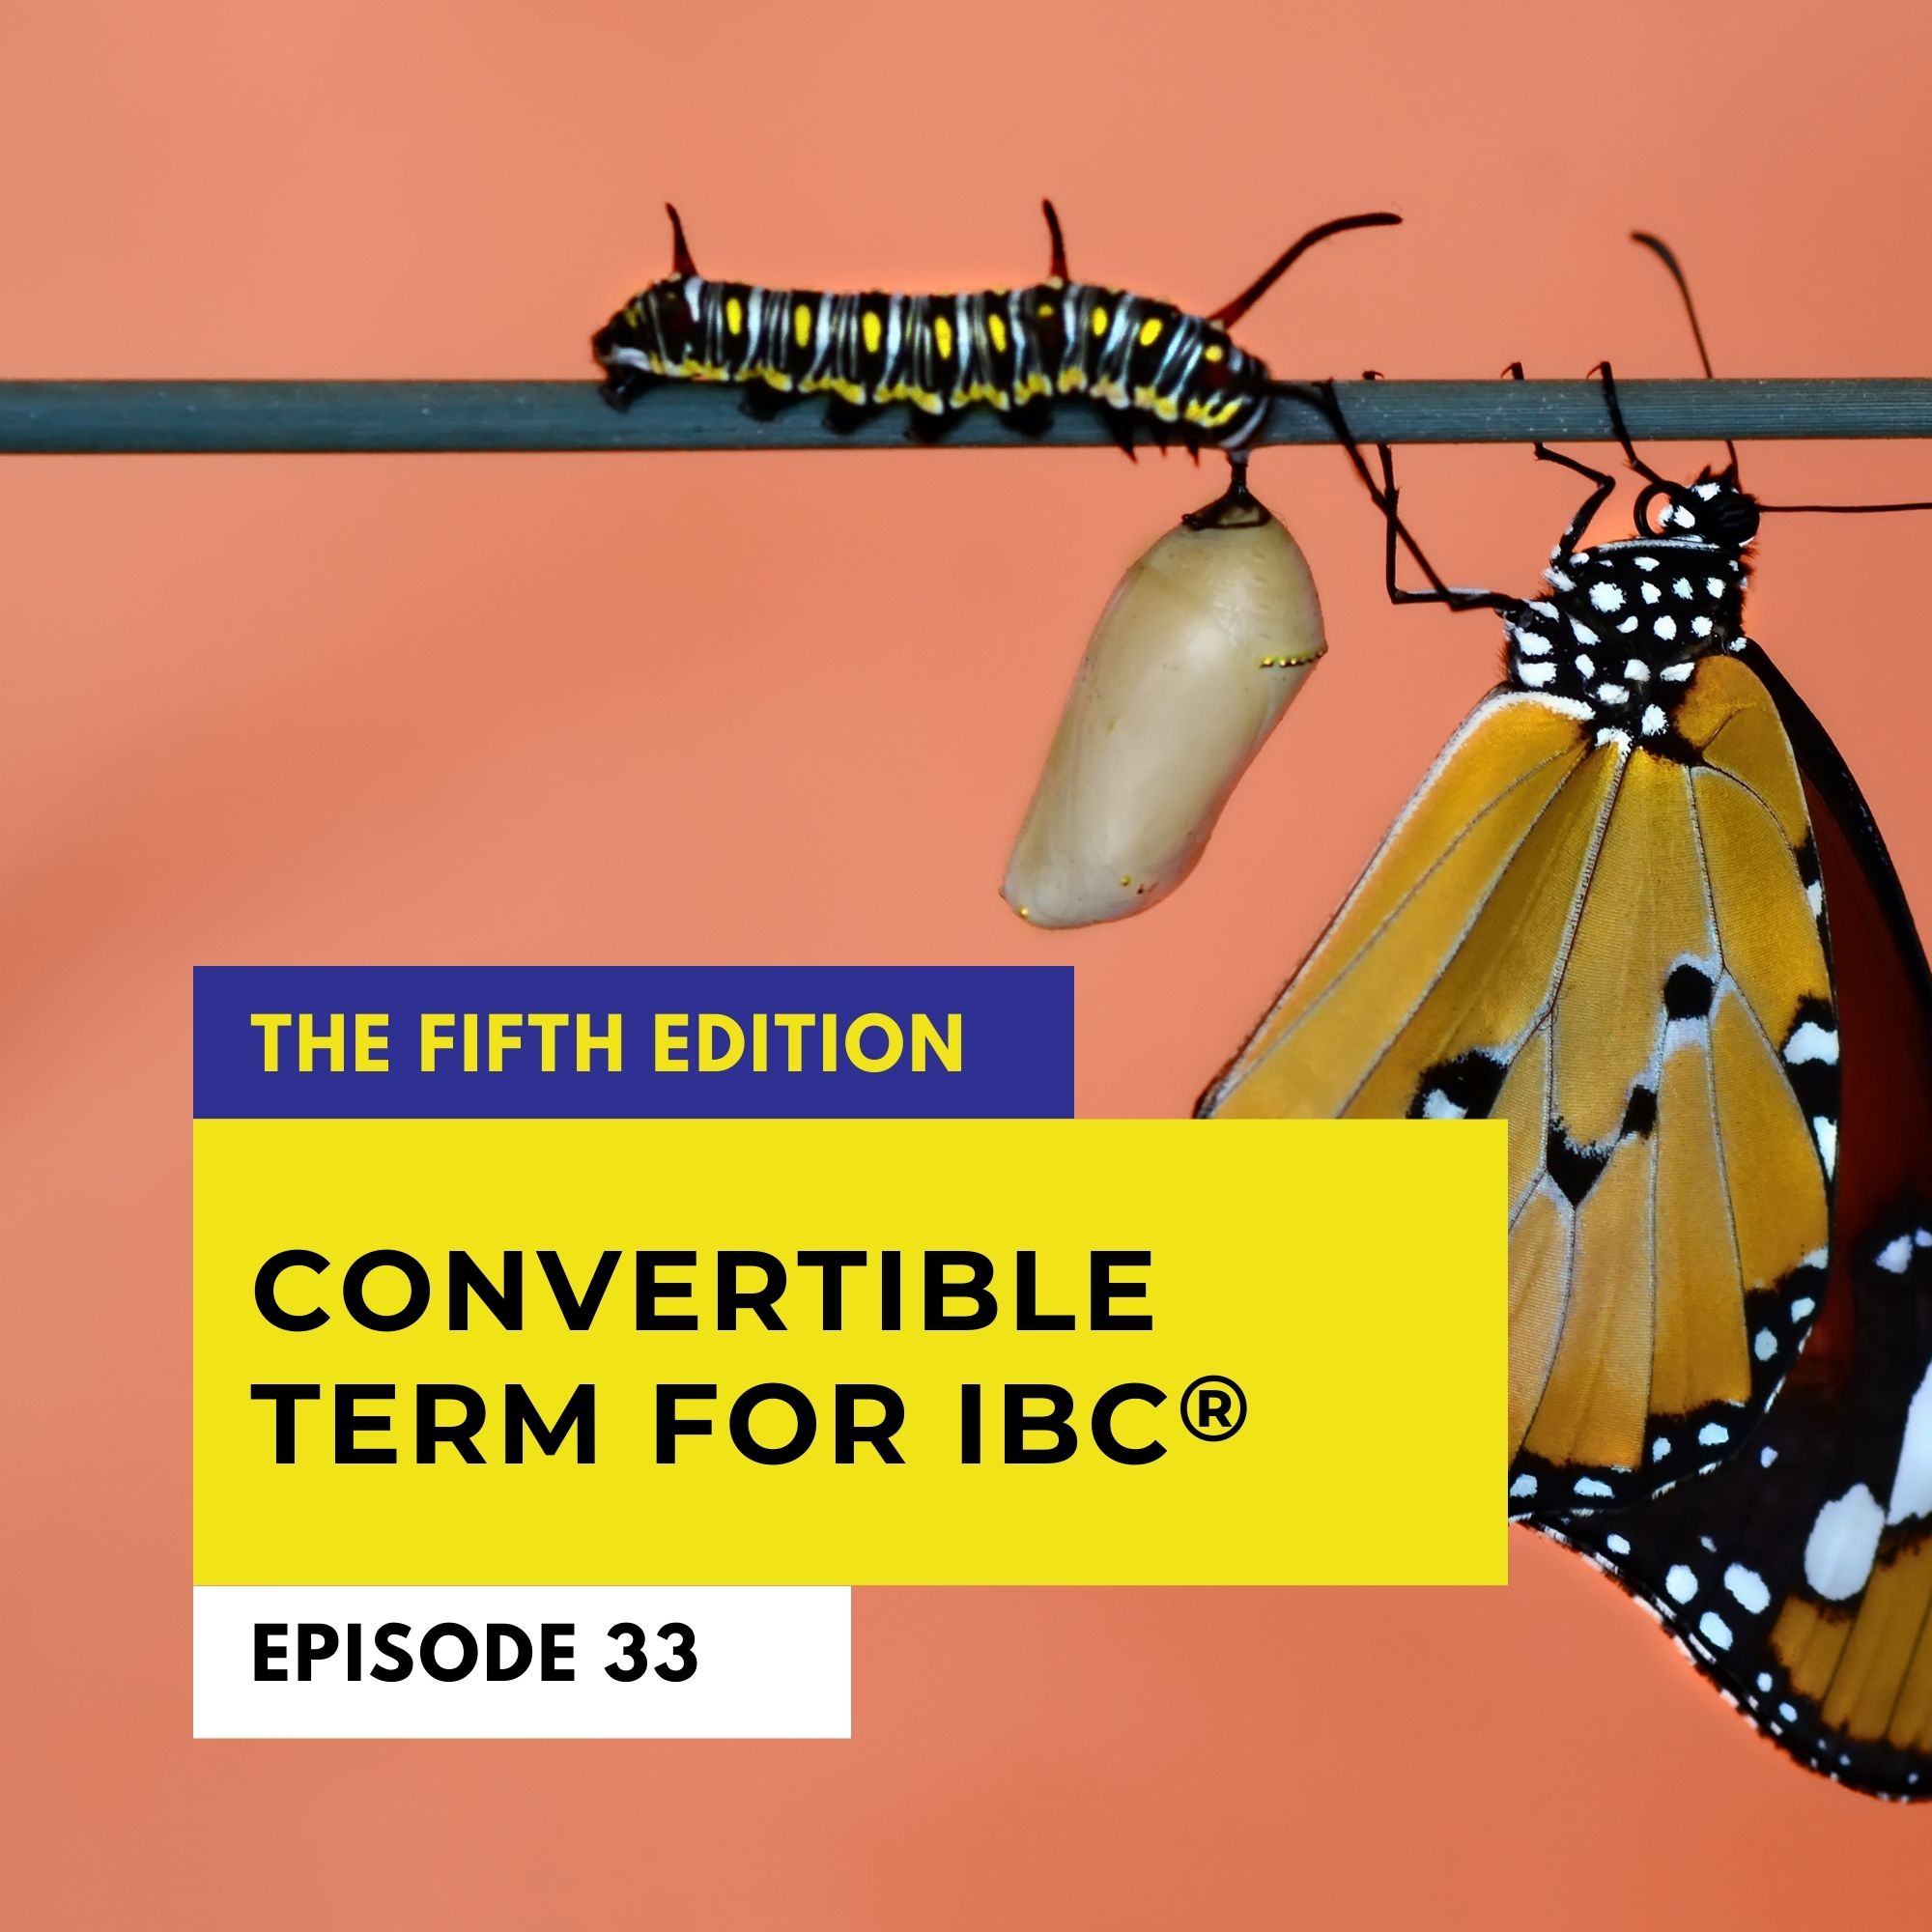 The Why and How of IBC Convertible Term